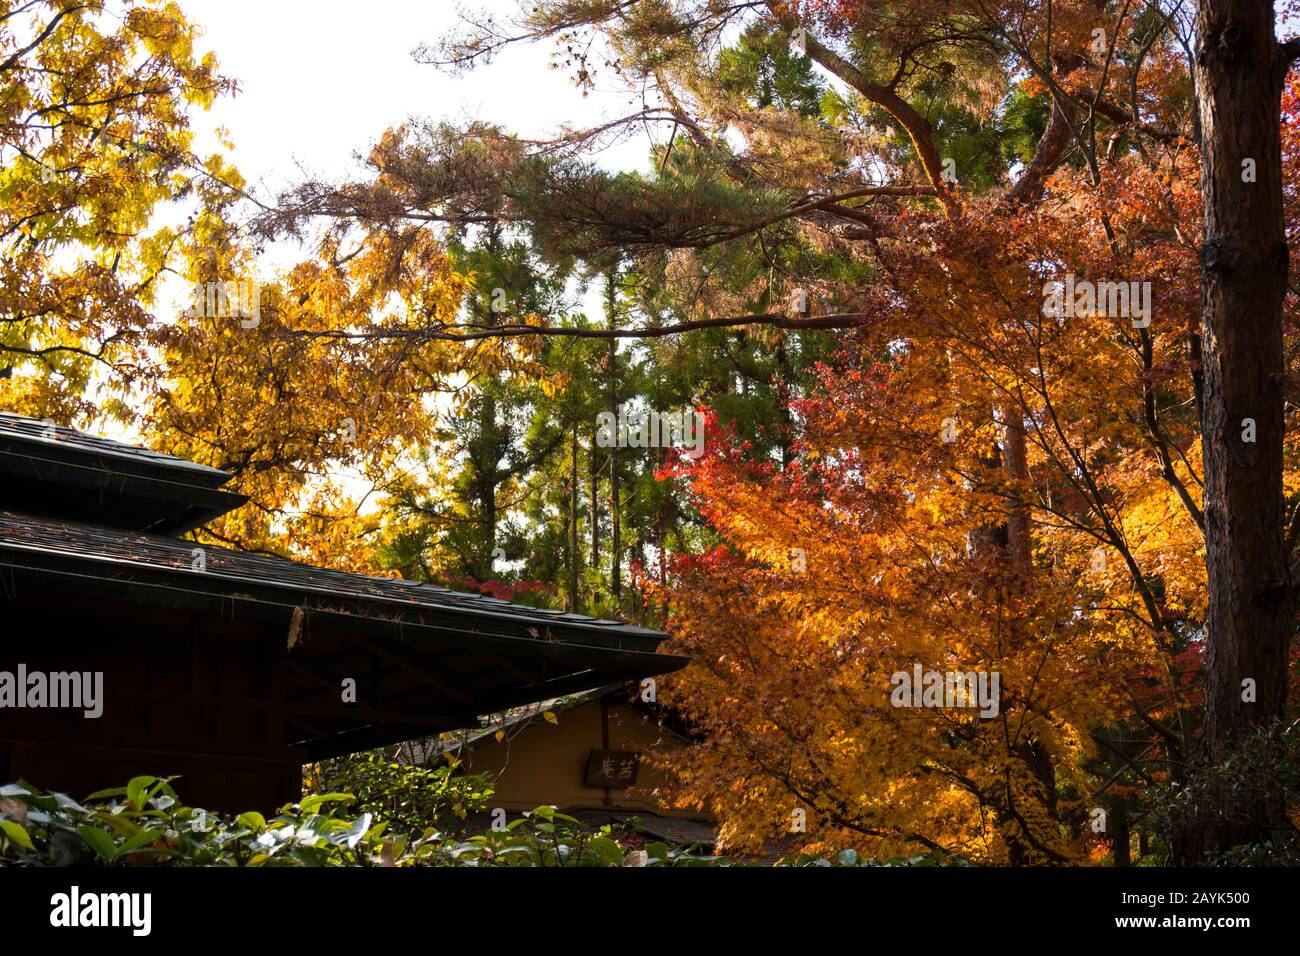 Colorful Autumn view of Japanese Huts in Japanese Garden, Osaka, Japan Stock Photo